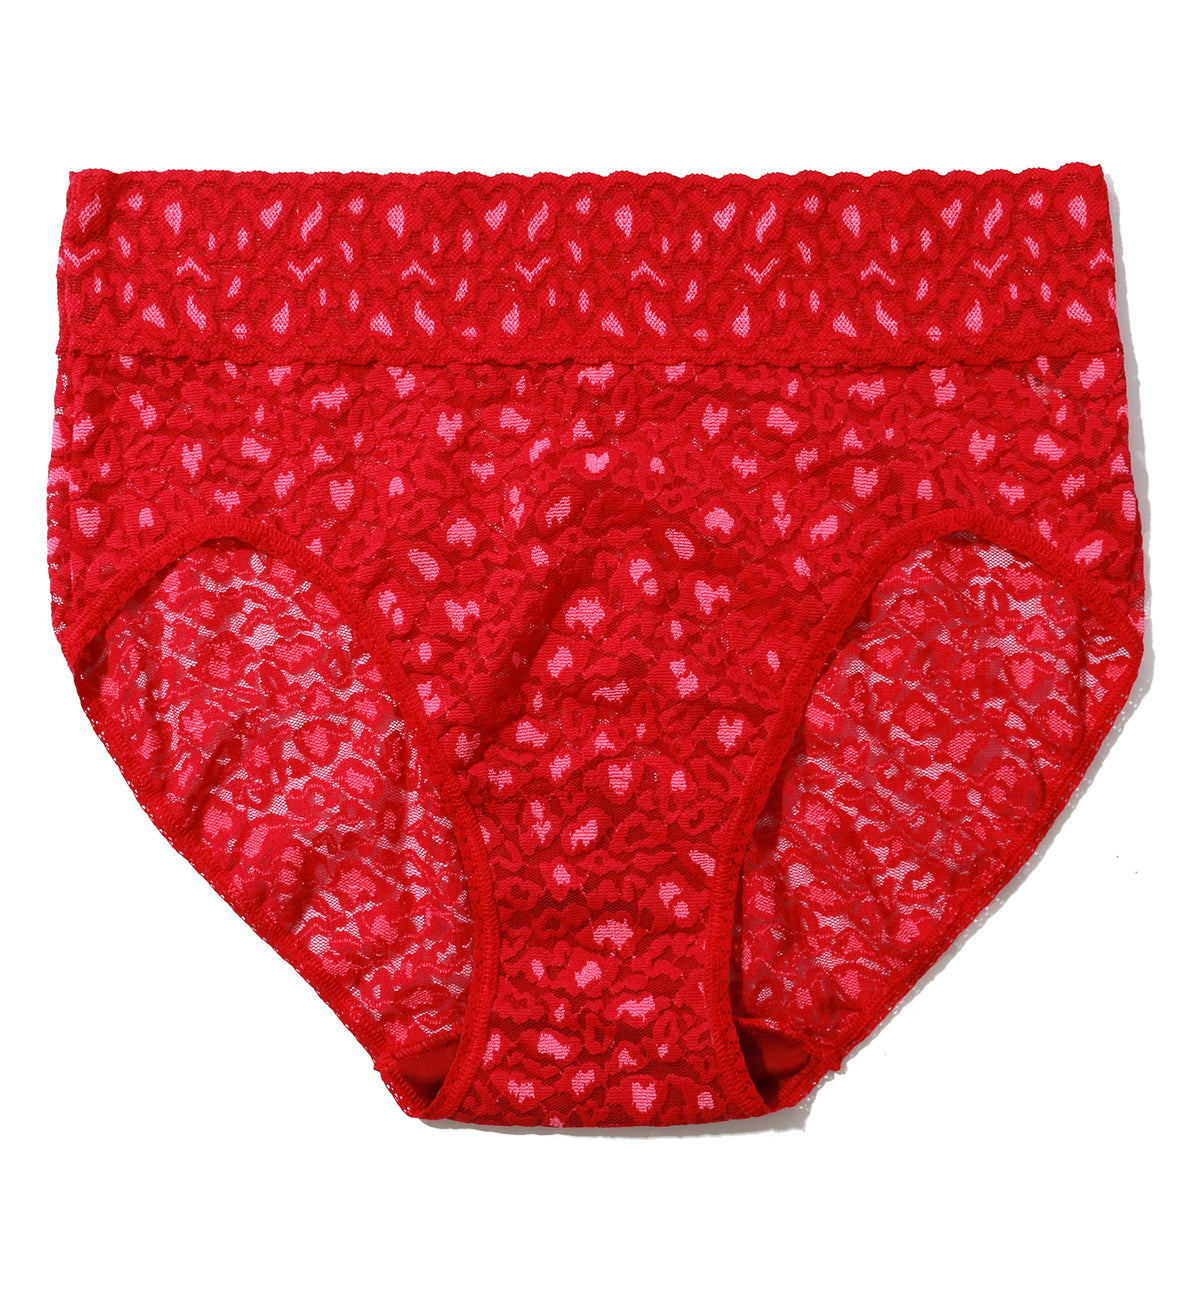 Hanky Panky Cross Dyed Leopard French Brief (7J2461),XS,Berry Sangria/Pink - Berry Sangria/Pink,XS